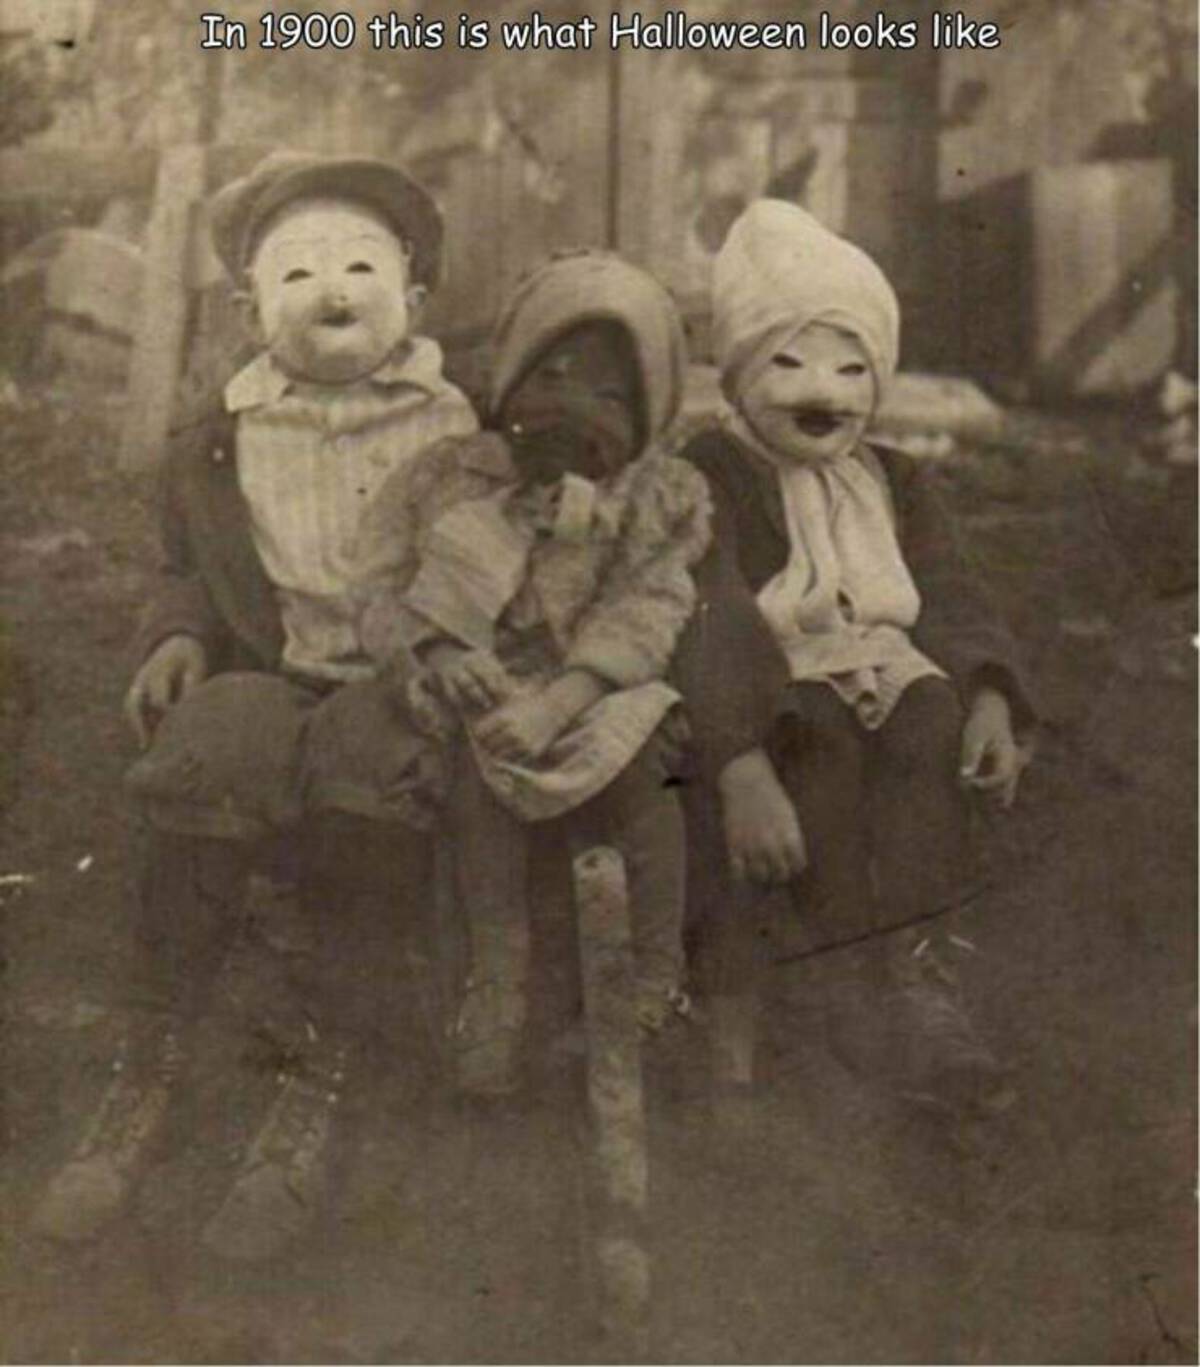 halloween 1900 - In 1900 this is what Halloween looks